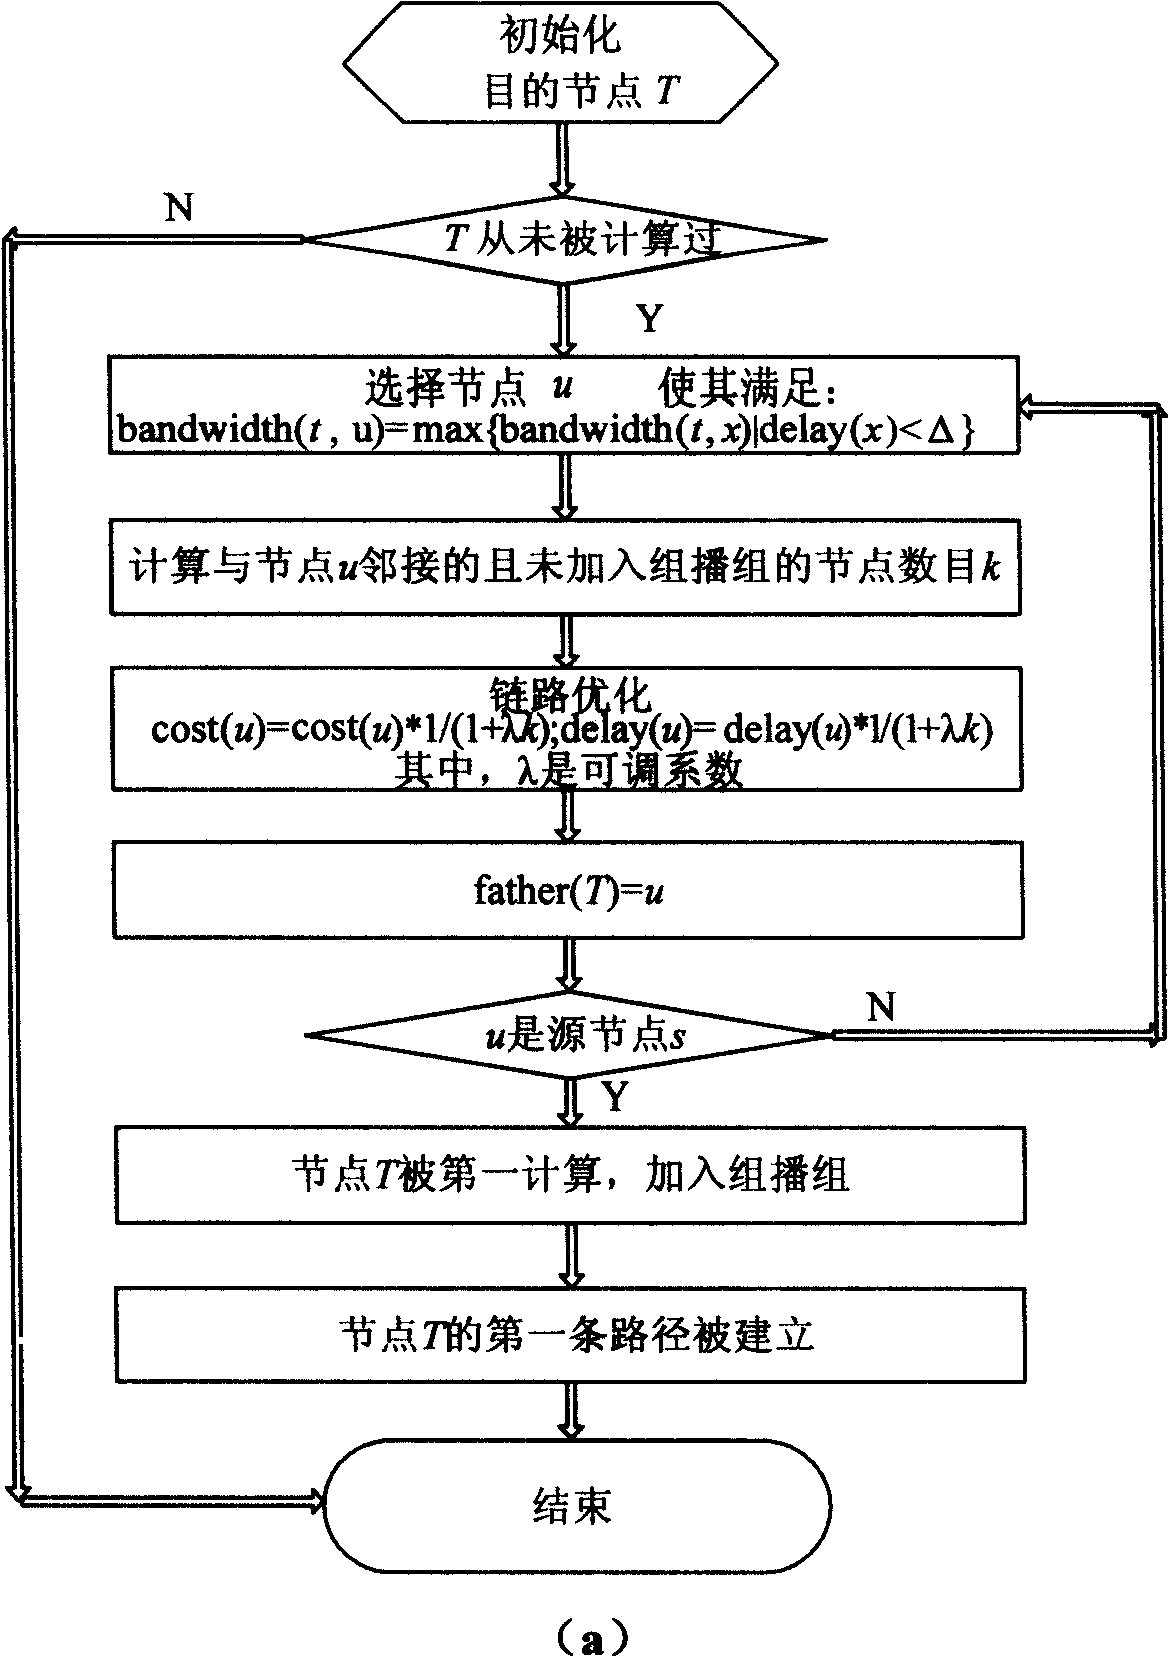 Multicast routing method for distributed network application layer based on network coding